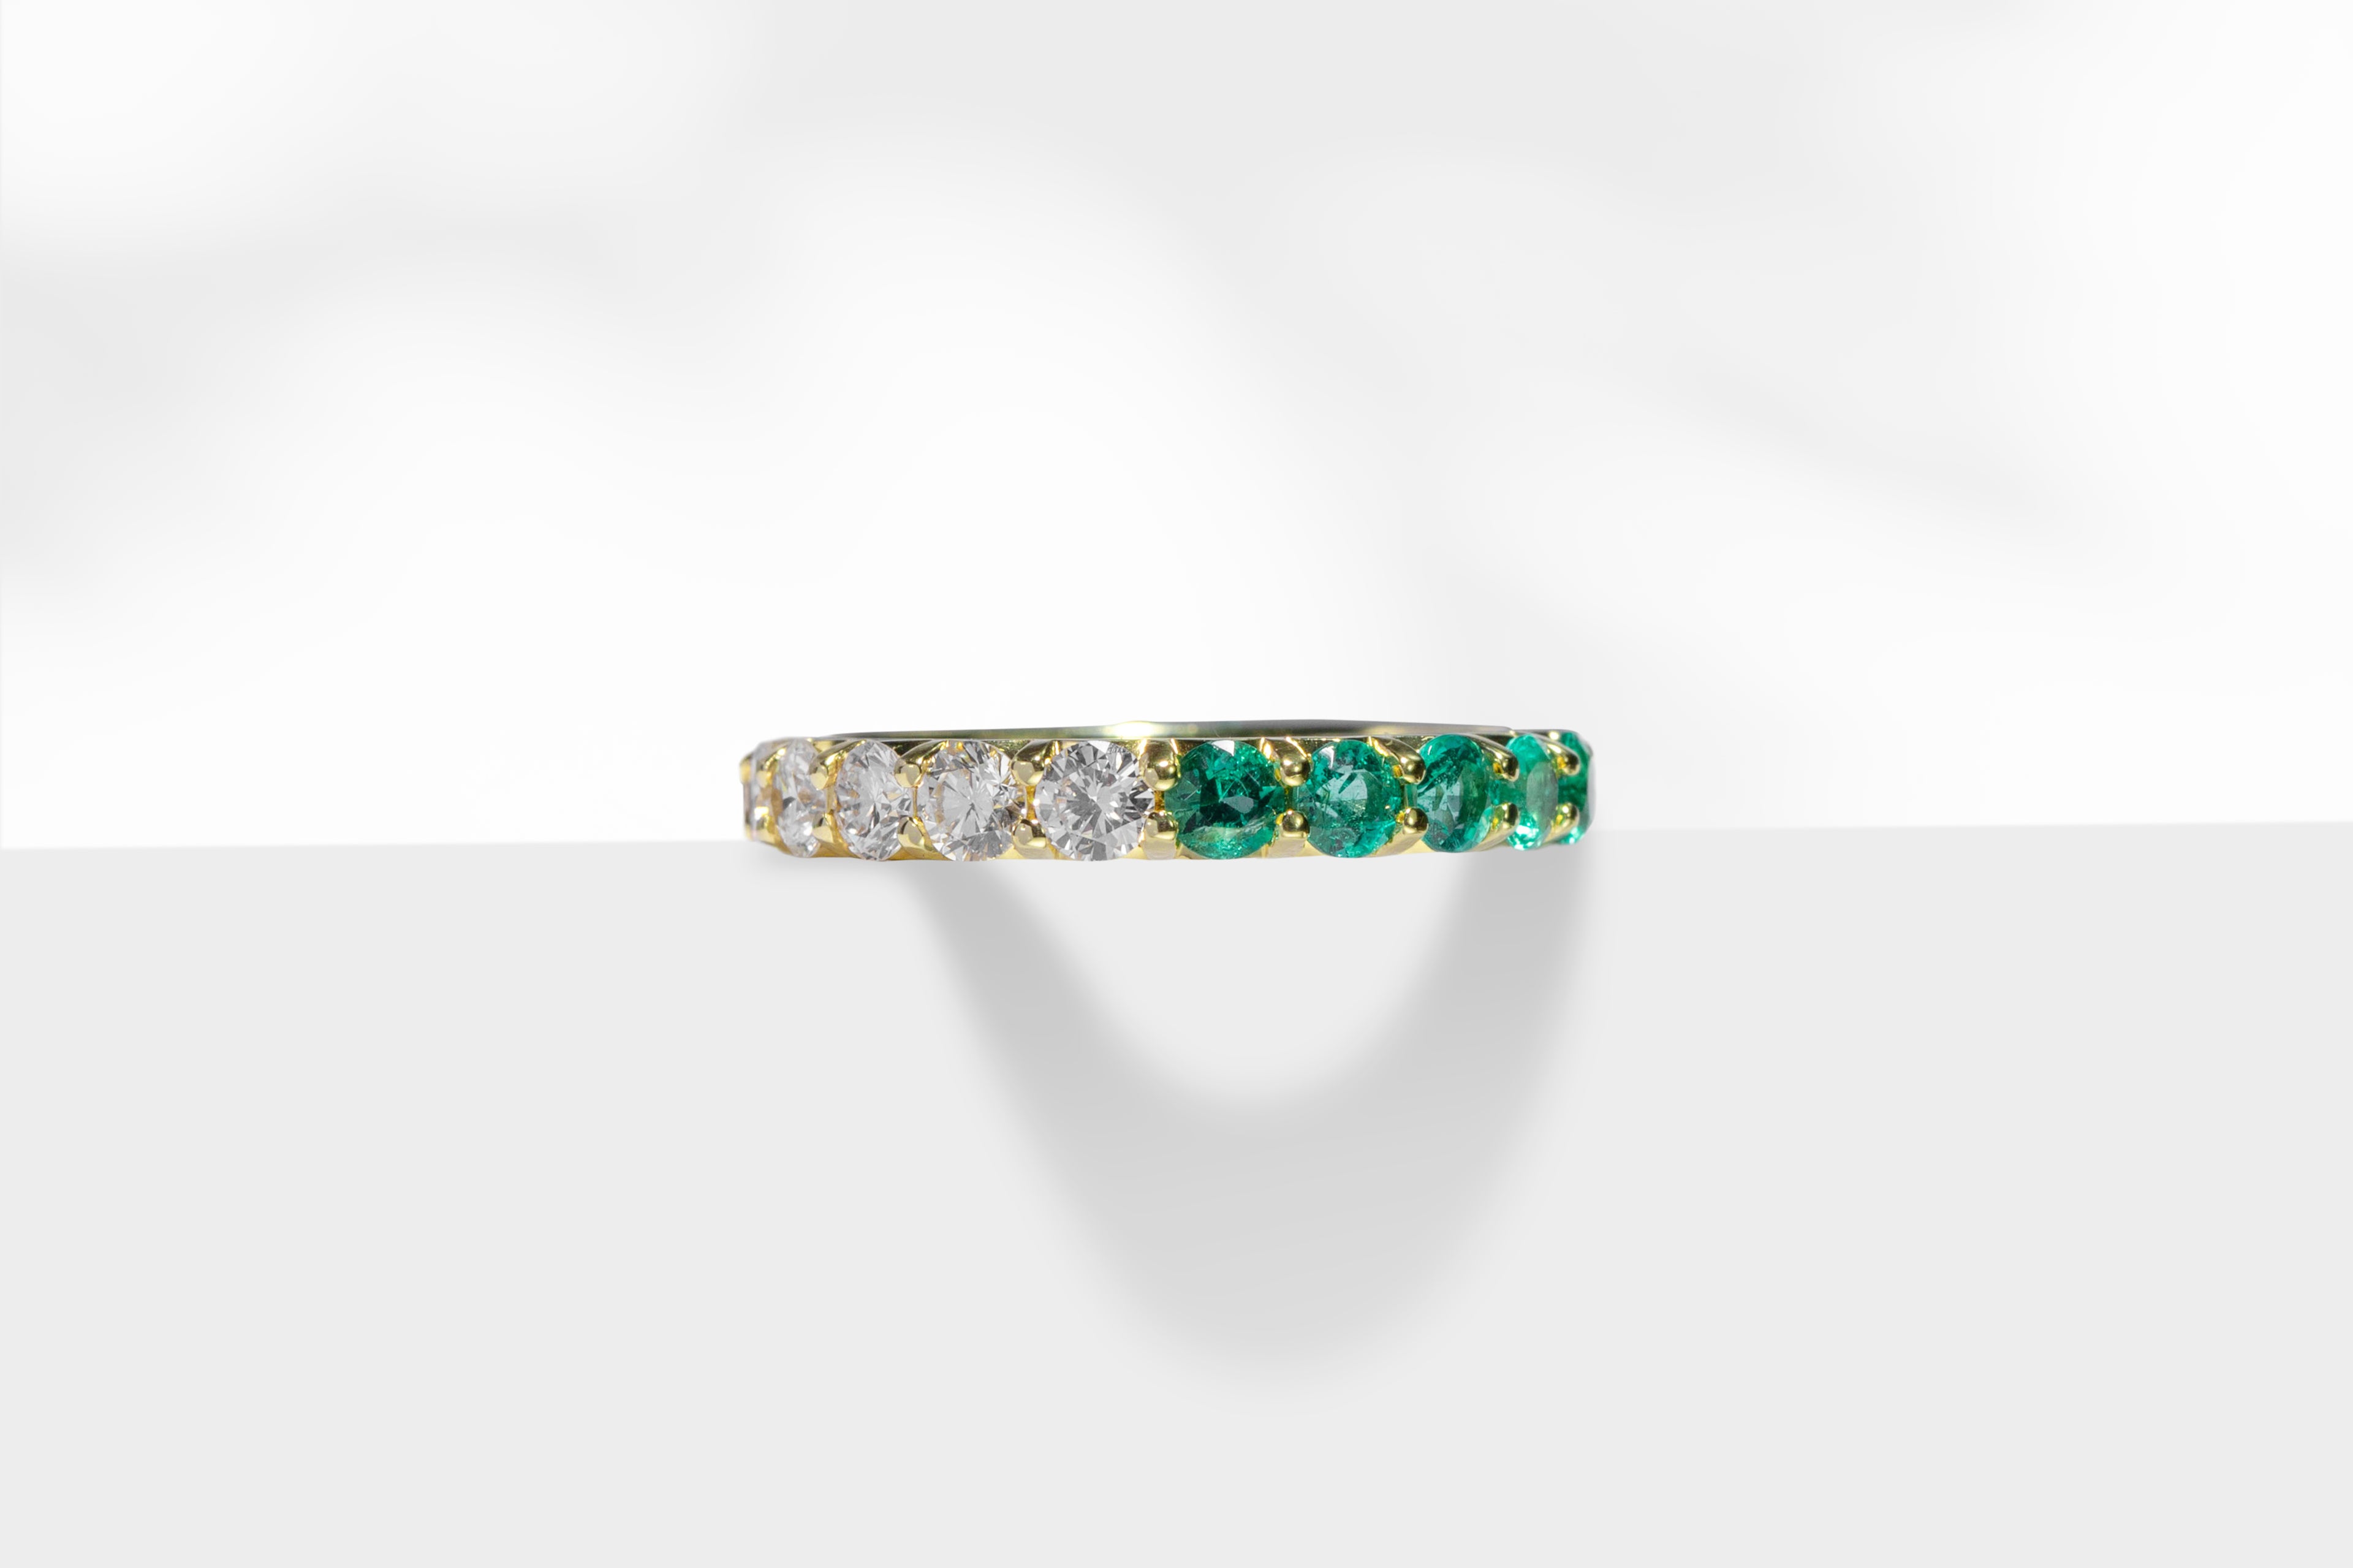 ILA SODHANI's Green Moon Eternity Band, from the ILA SODHANI Lunar Eternity Band Collection; with natural emeralds and white diamonds set in yellow gold shown on a white background.